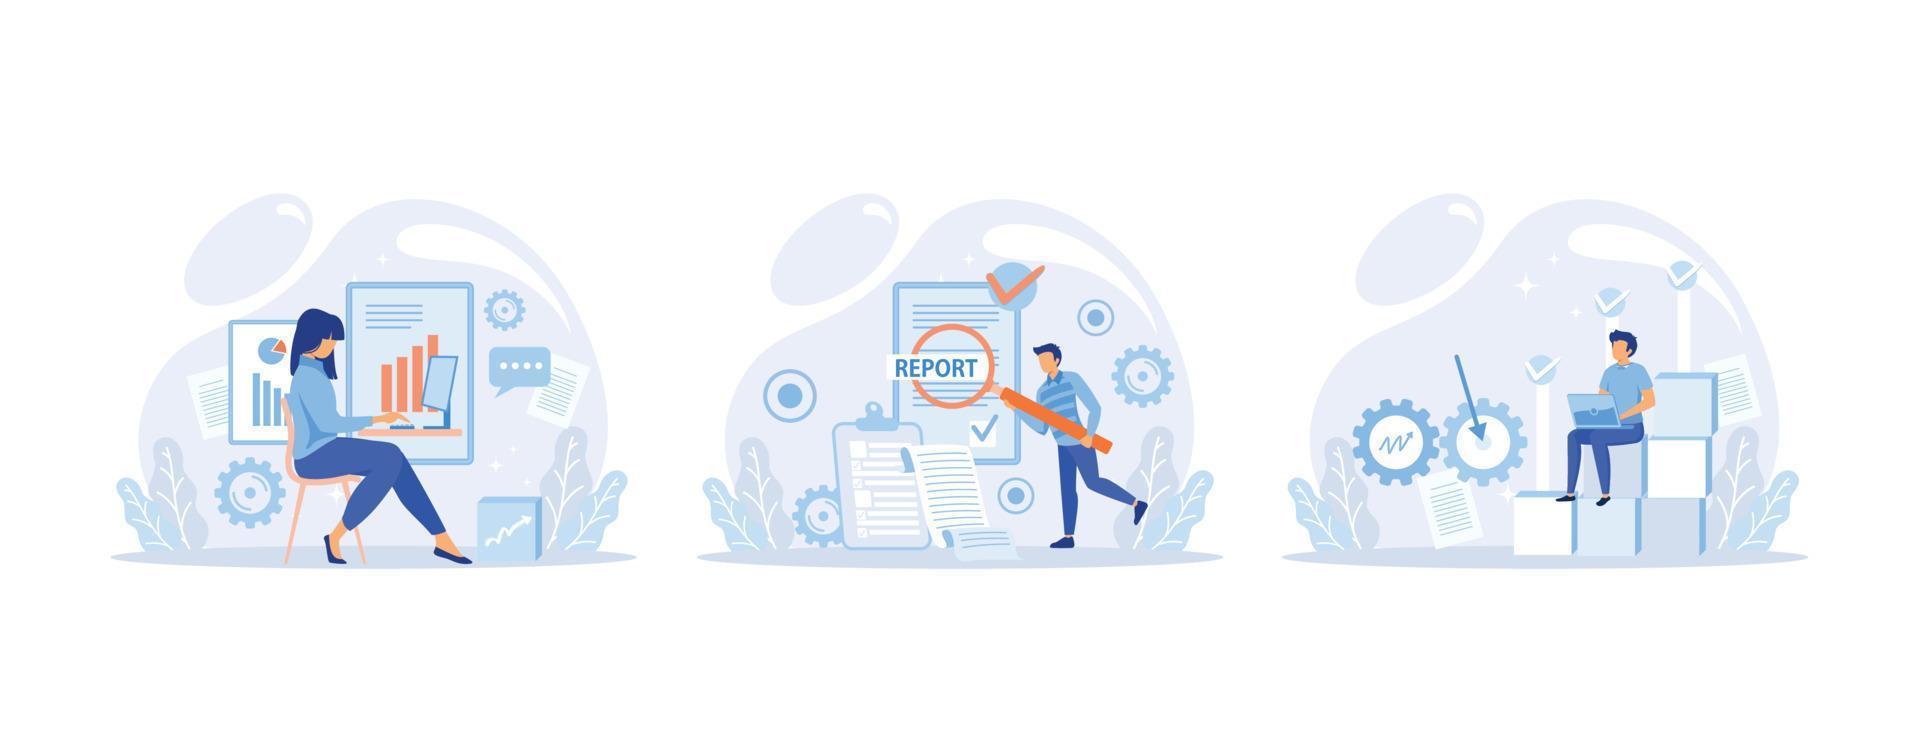 Strategic business planning, automation process. Business mission, rules, vision statement, competitive intelligence, goals action plan, brand success, set flat vector modern illustration